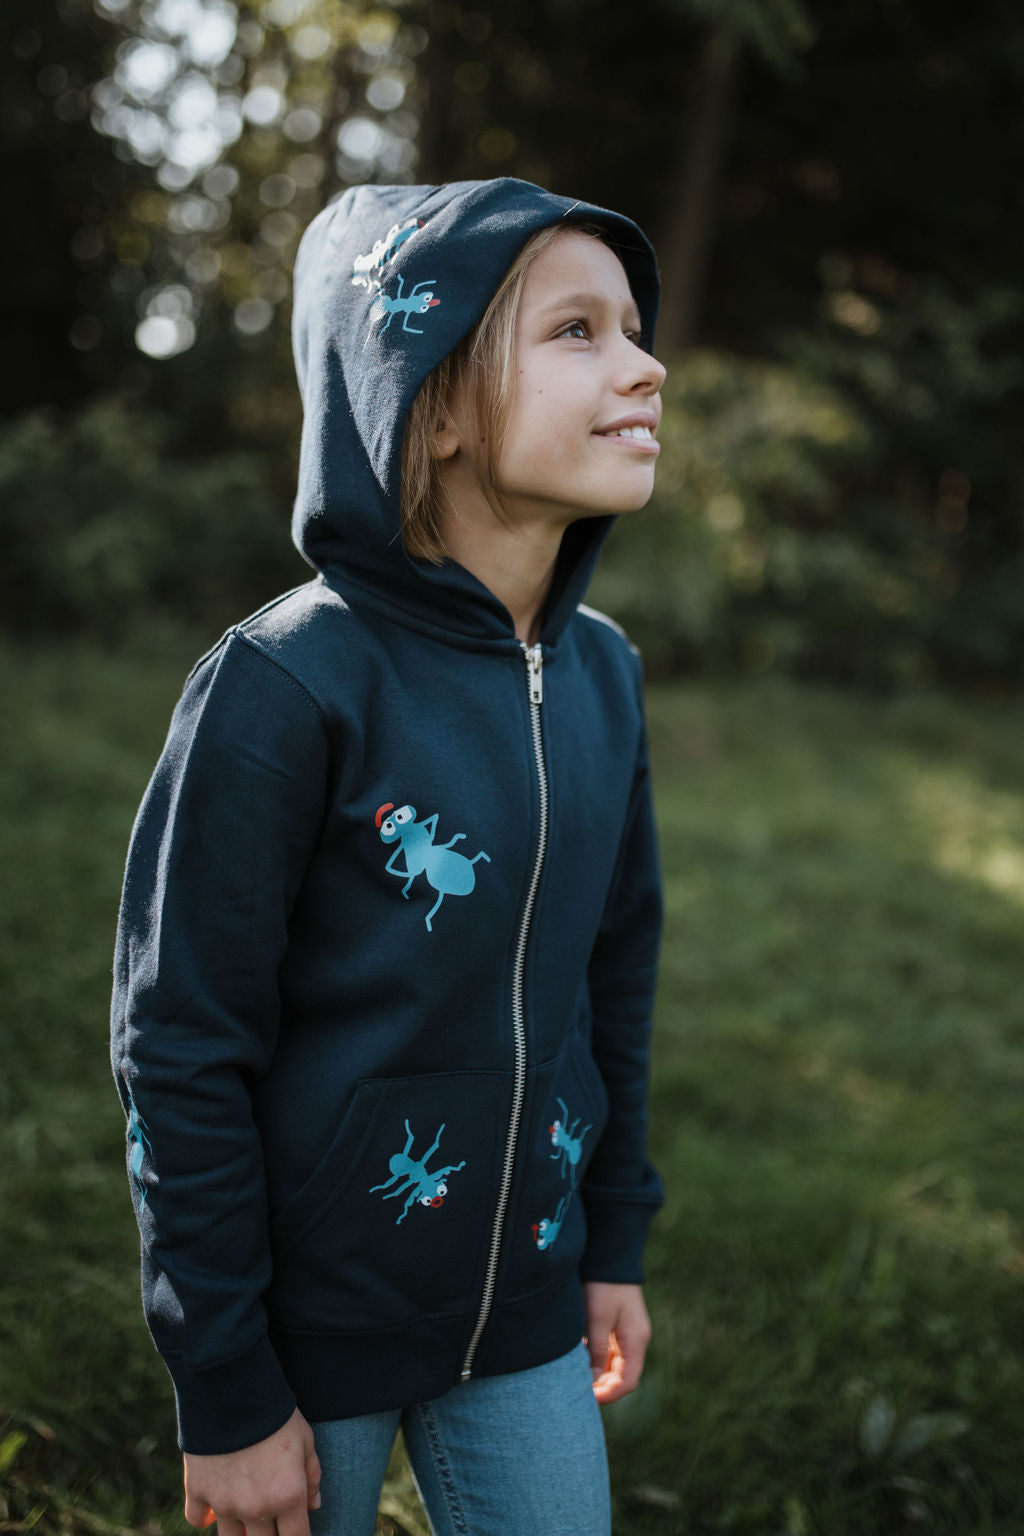 Children's blue jacket with ants